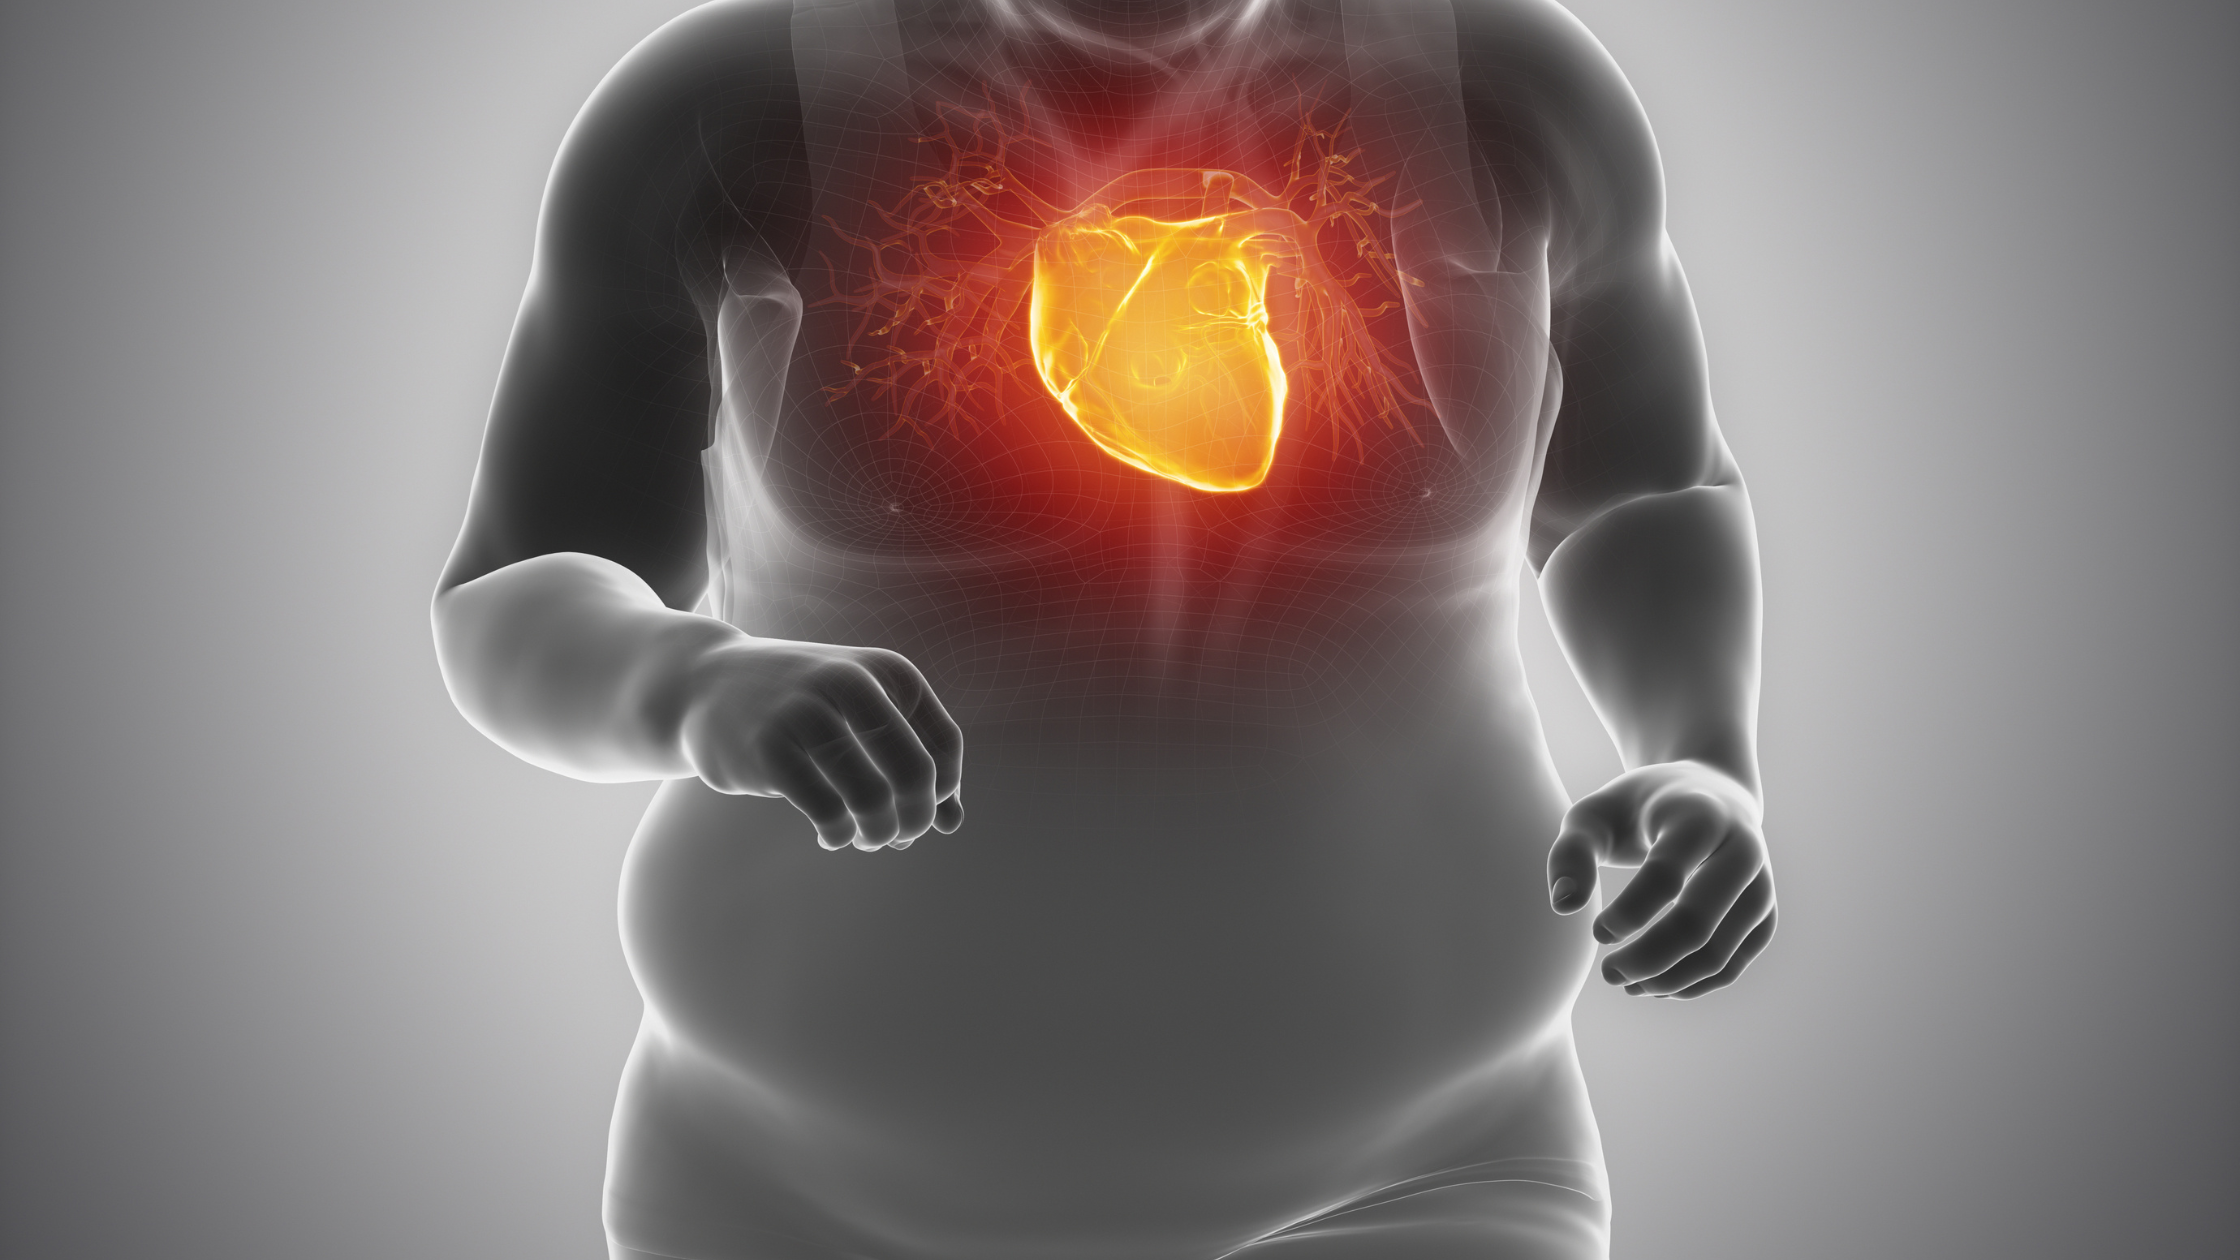 illustration of an obese person with a glowing red heart